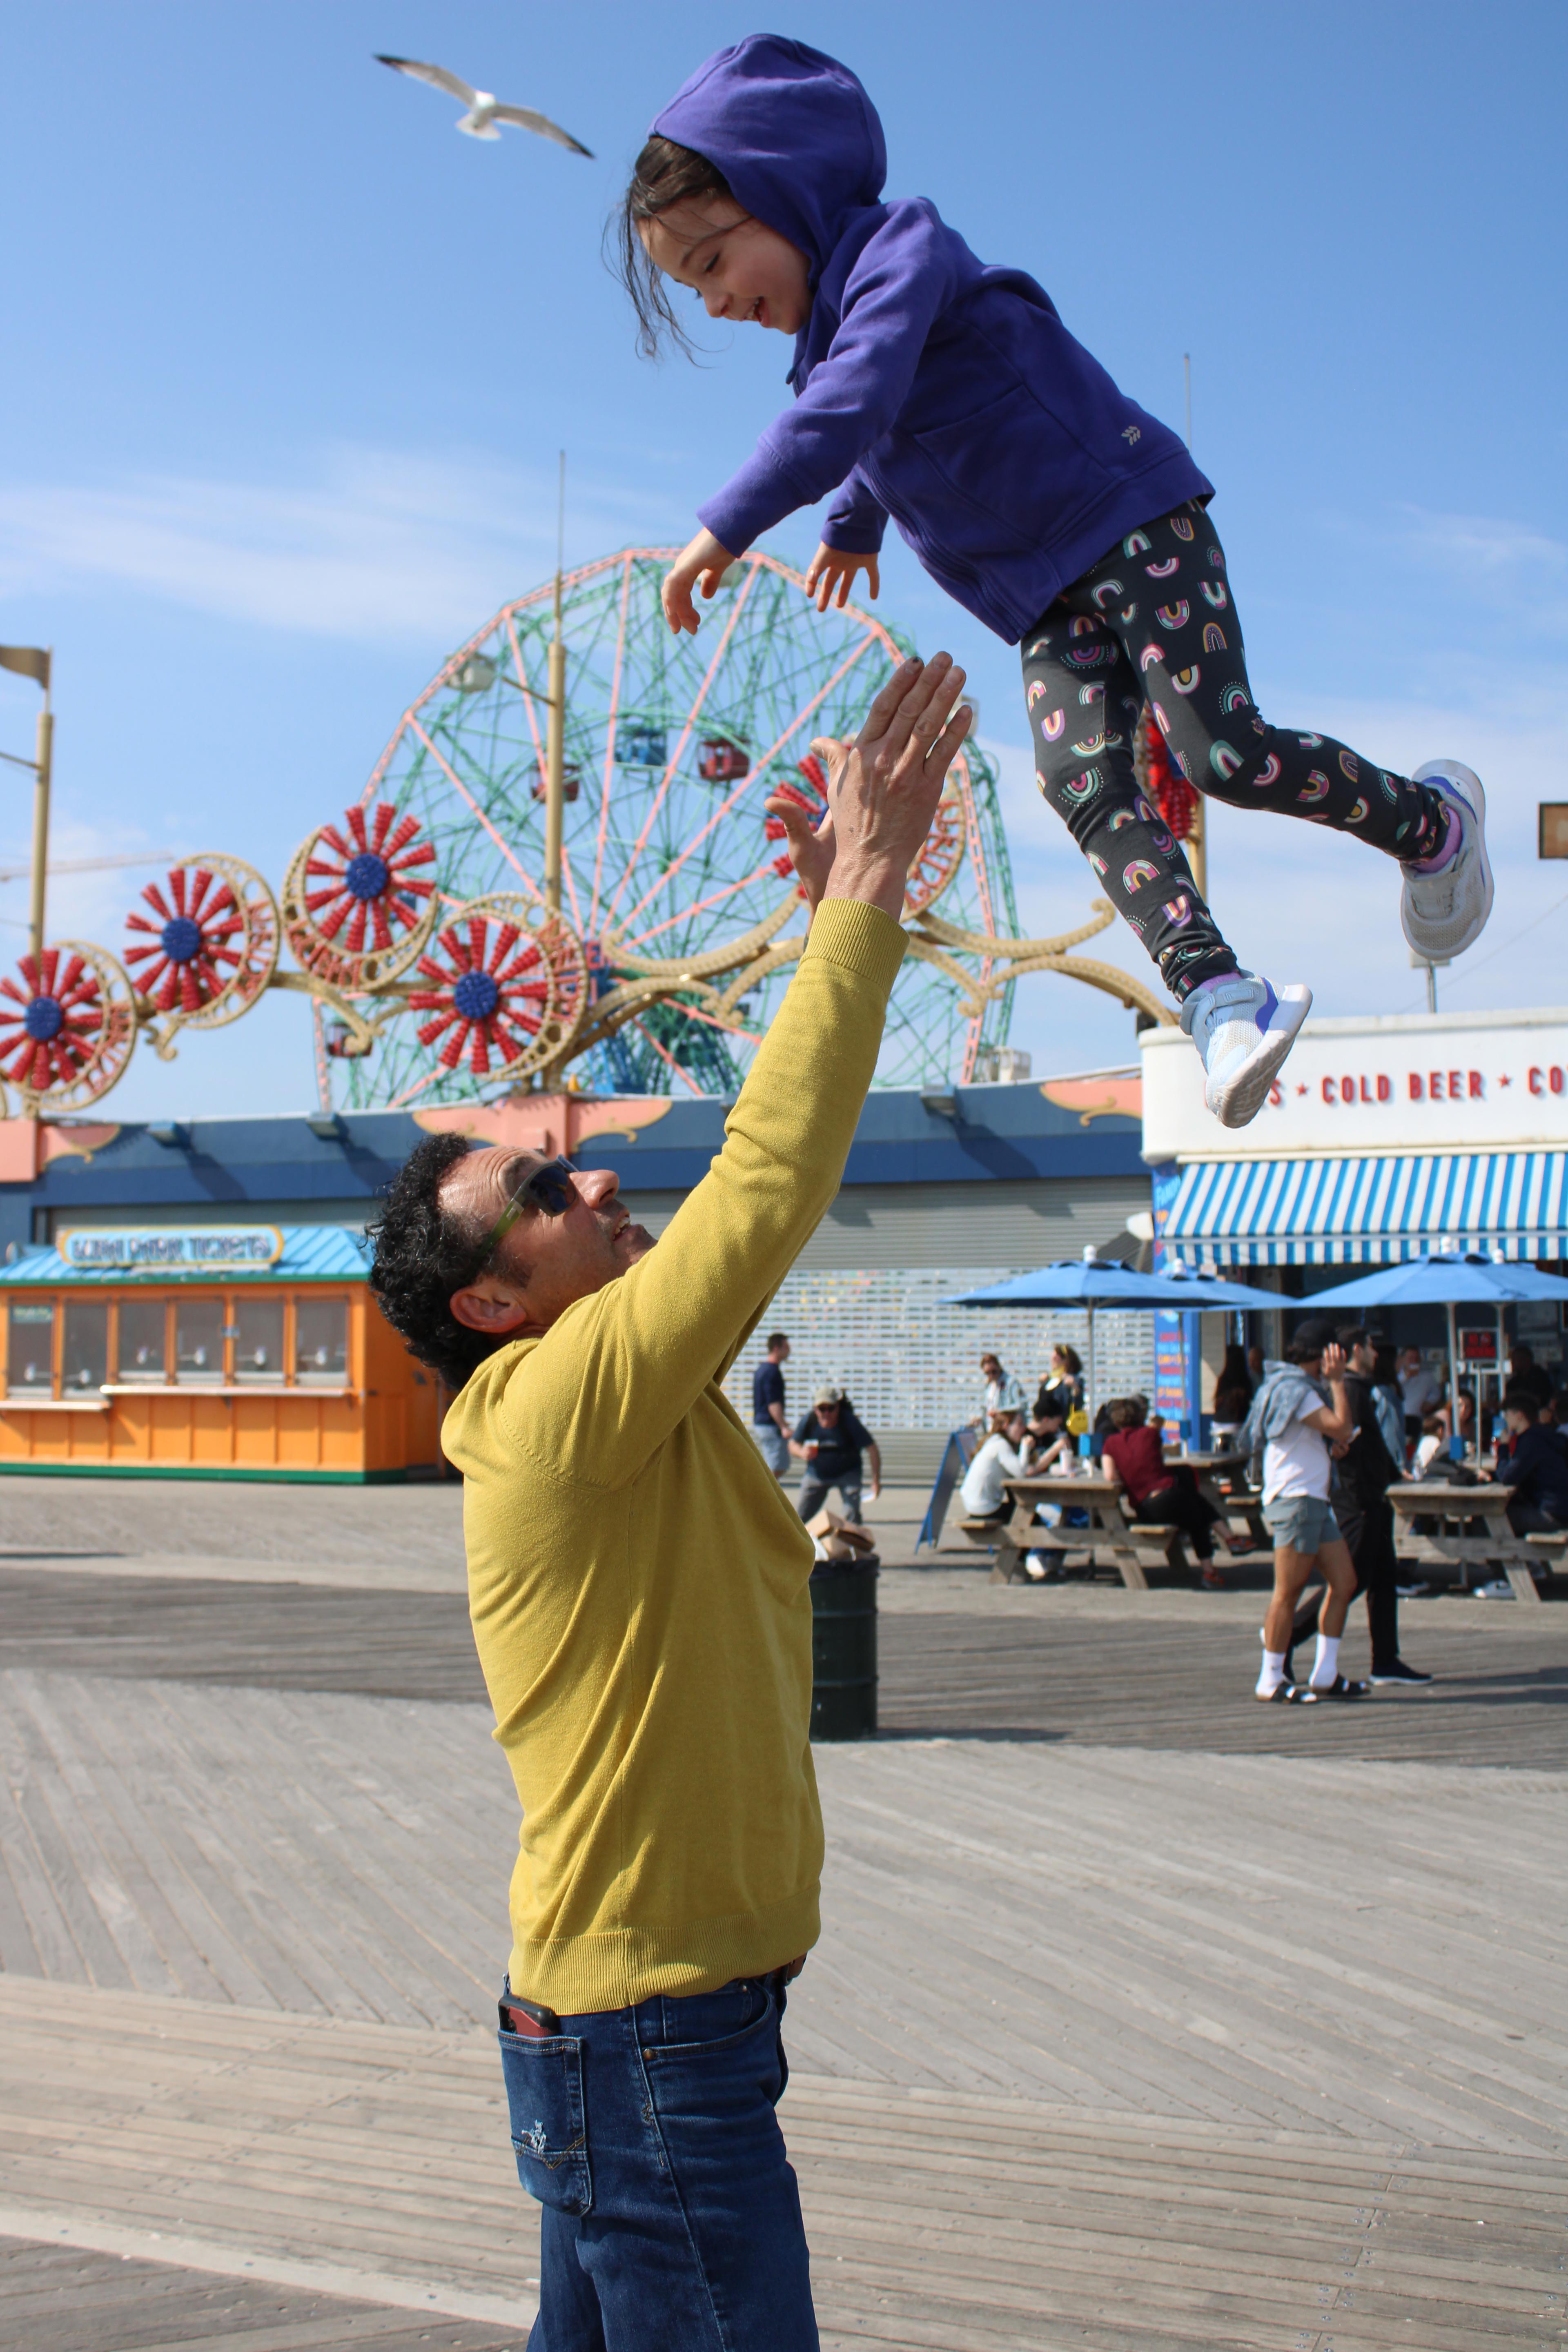 Color photograph of a man wearing a yellow sweatshirt, sunglasses, and blue jeans hoisting a small girl aloft with both hands in the air above him on the Coney Island boardwalk during the day. There are concession stands and a Ferris wheel in the background. The girl is smiling and gazing down at the man below. She wears a blue hoodie jacket, black leggings covered in decorative patterns, and white sneakers. The sky is blue and a seagull flies overhead in the distance, to the left of the girl's head.